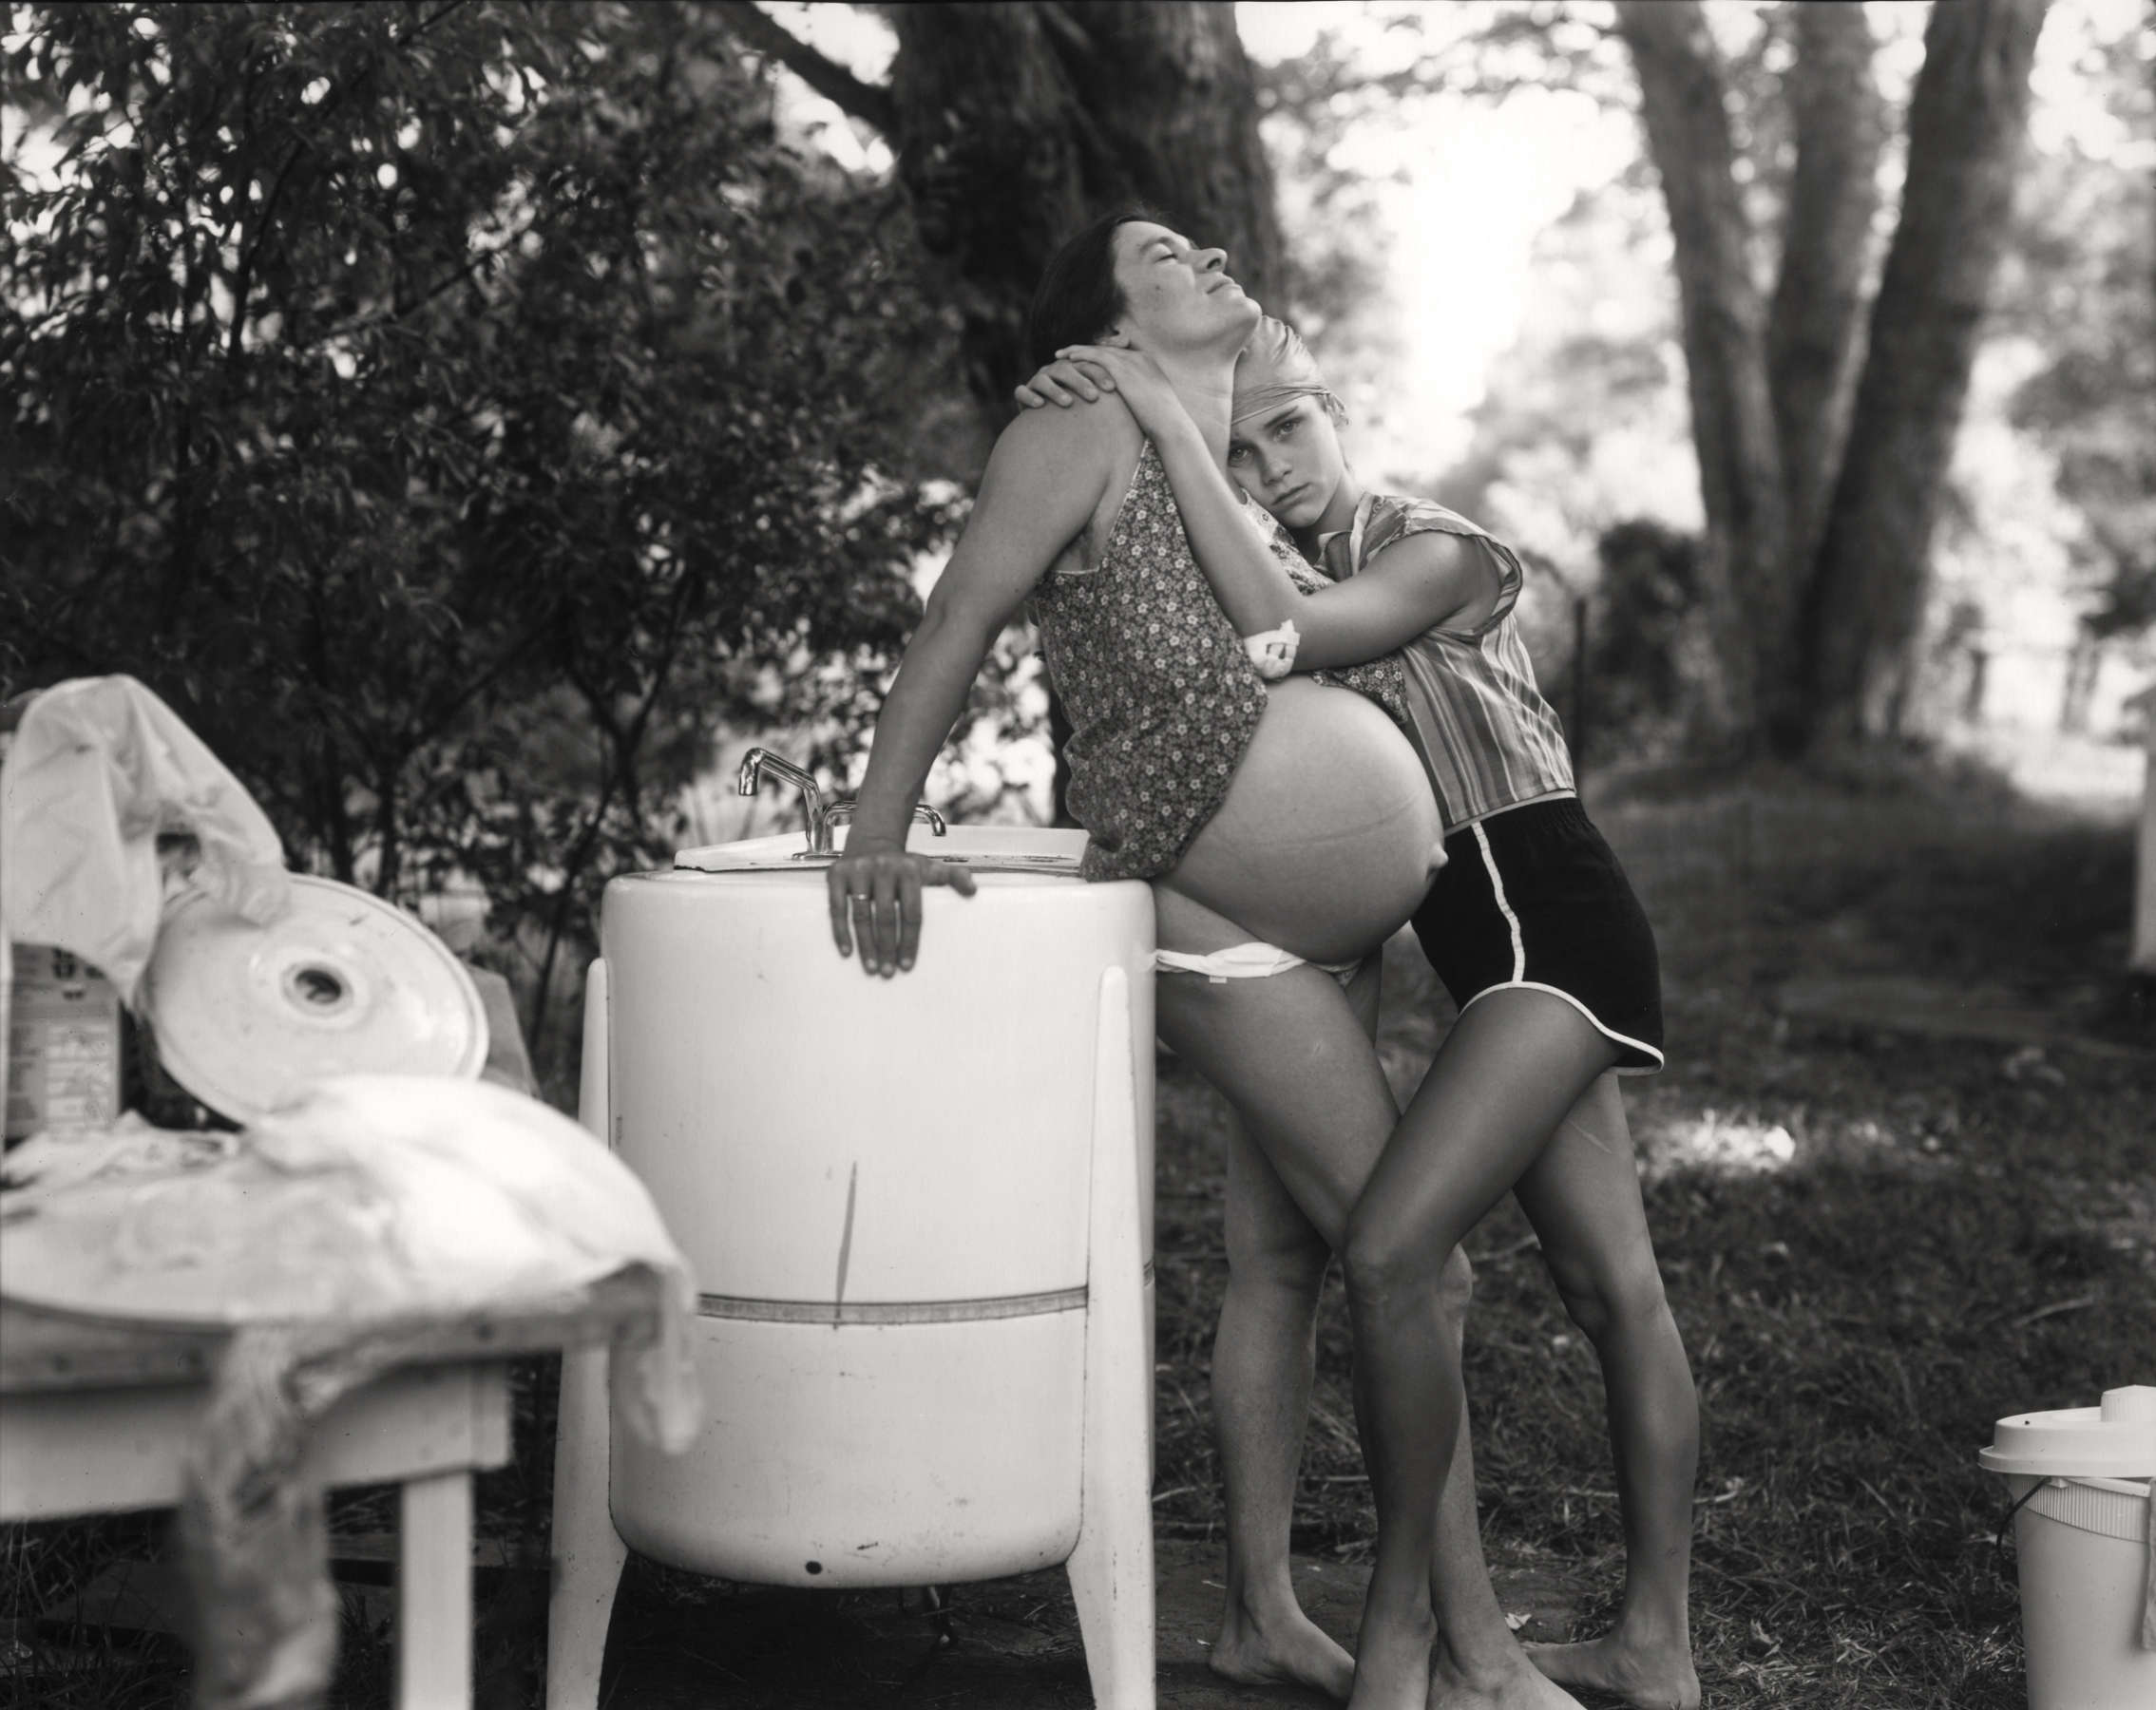 Sally Mann in: Looking at Family: Photographs from the Collection